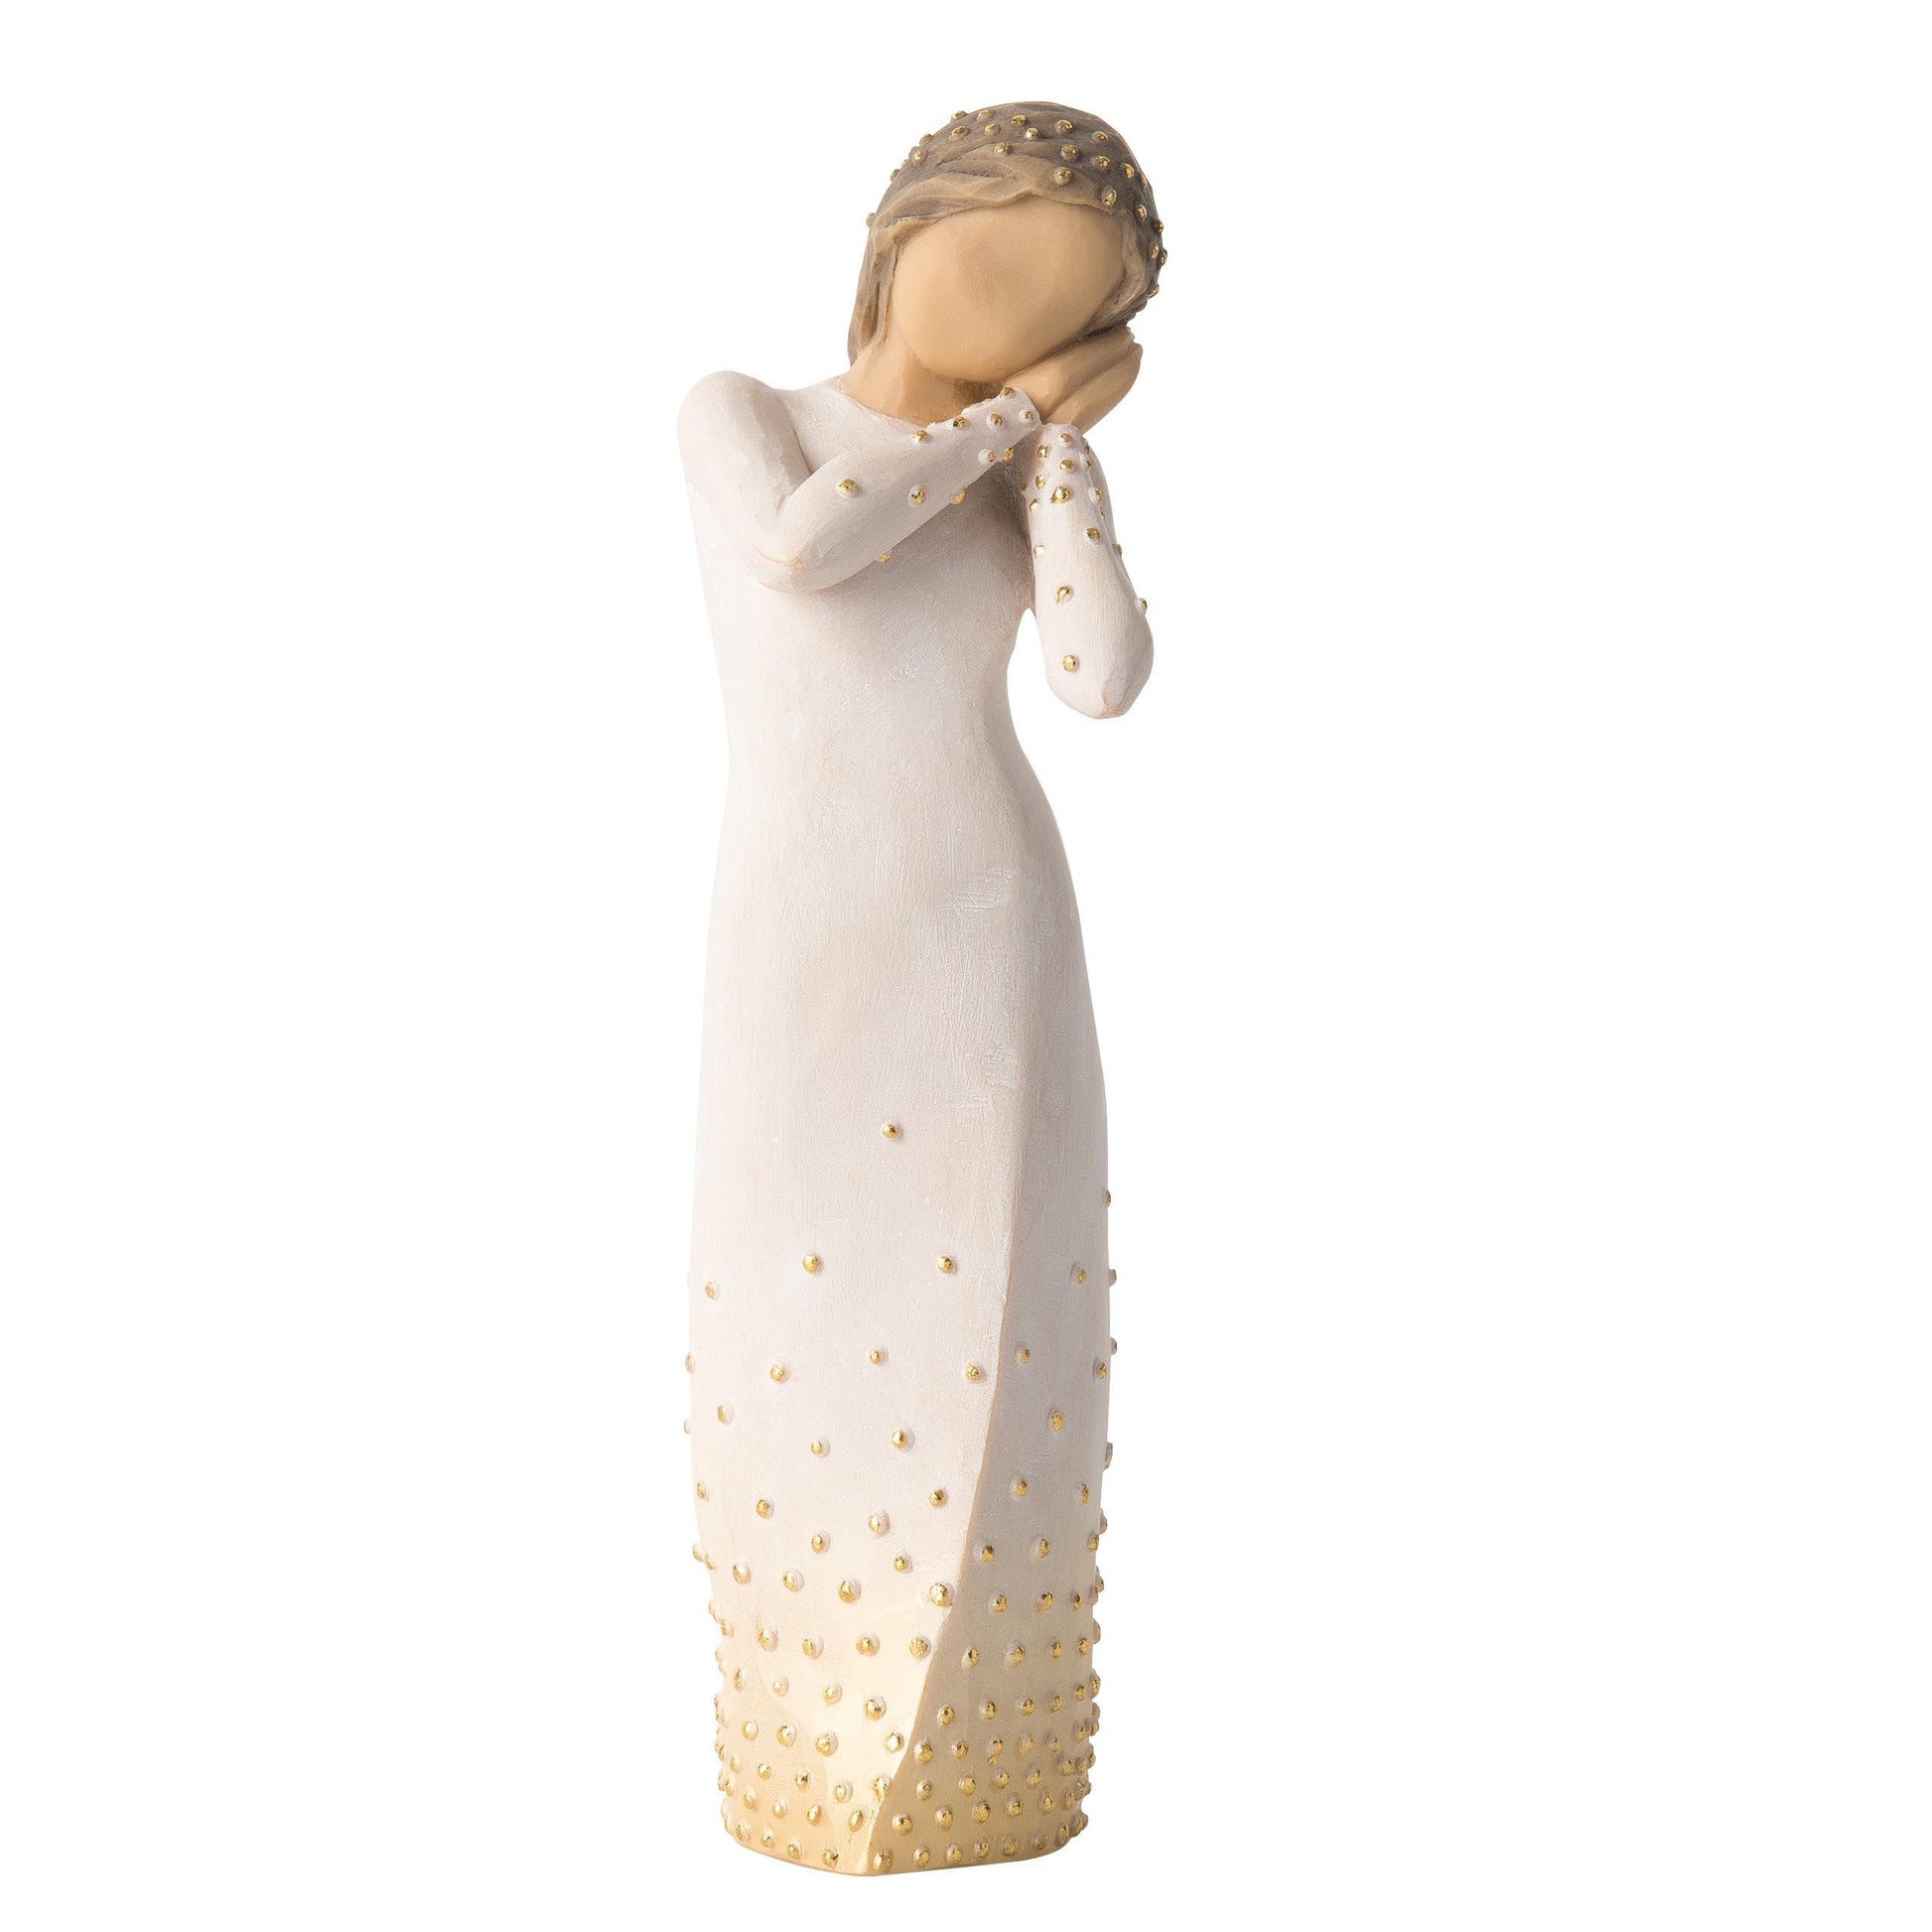 Willow Tree - Wishing (Willow Tree) - Gallery Gifts Online 